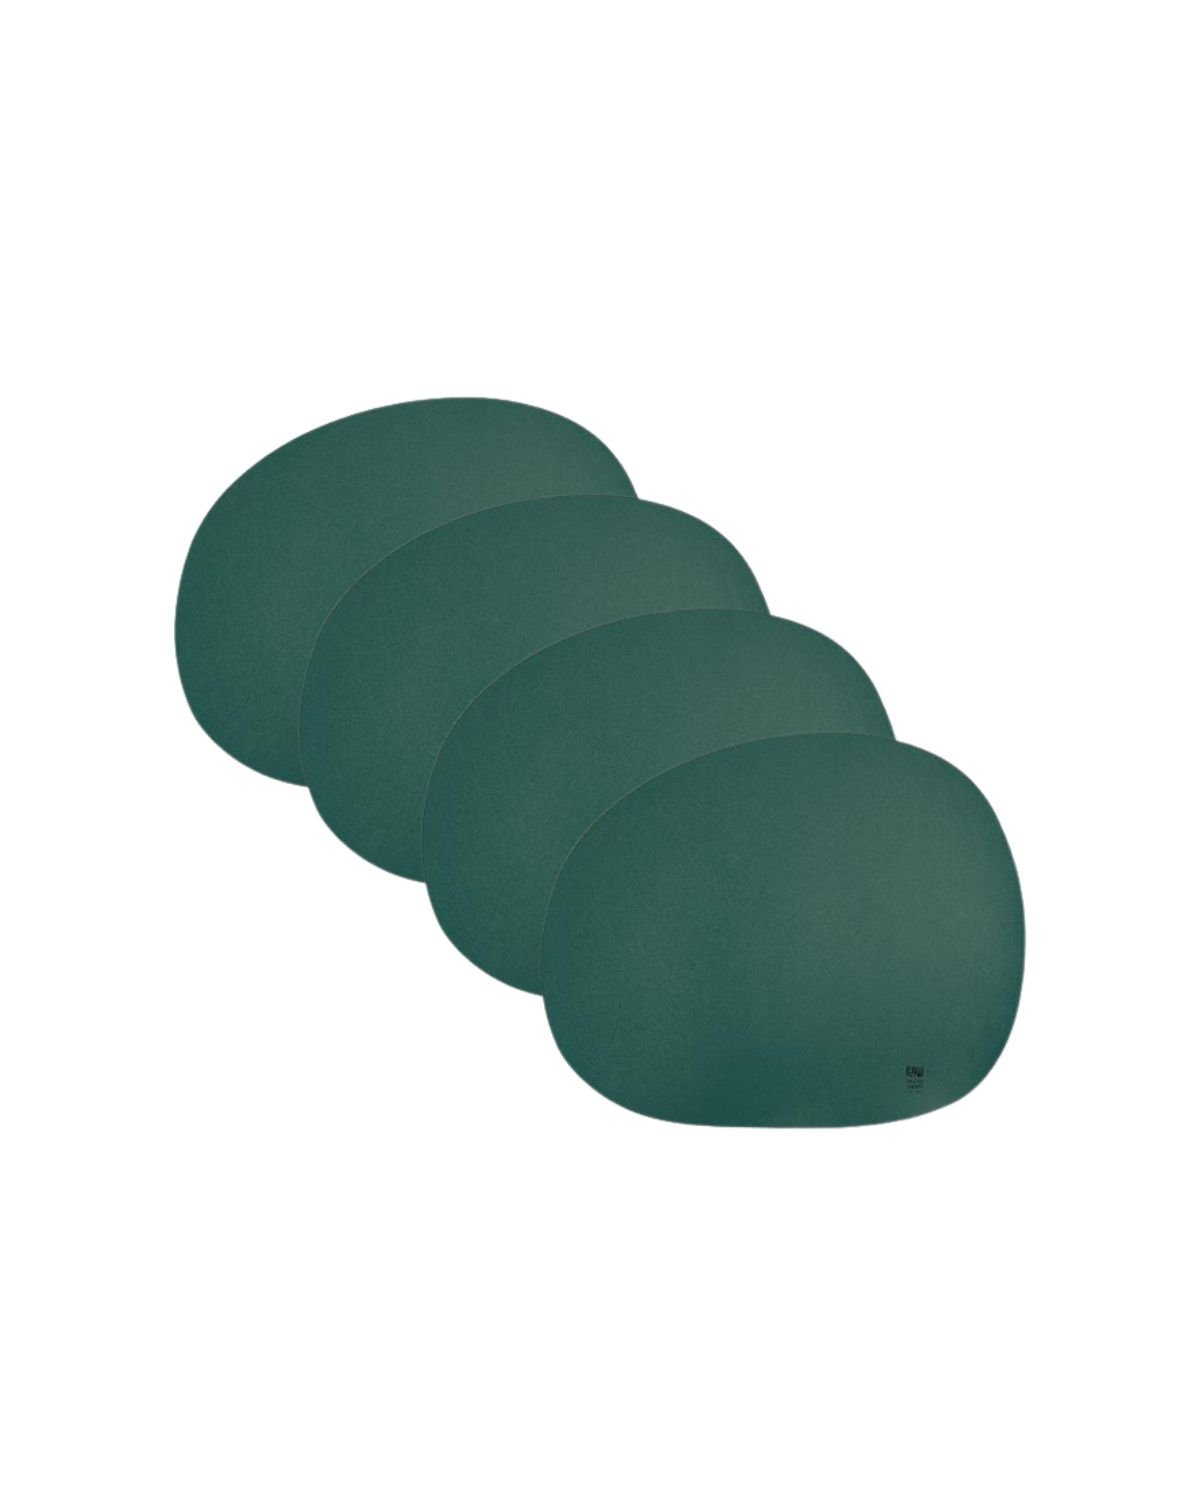 RAW - Silicone Placemat - 4 pcs - Dark green (15398)